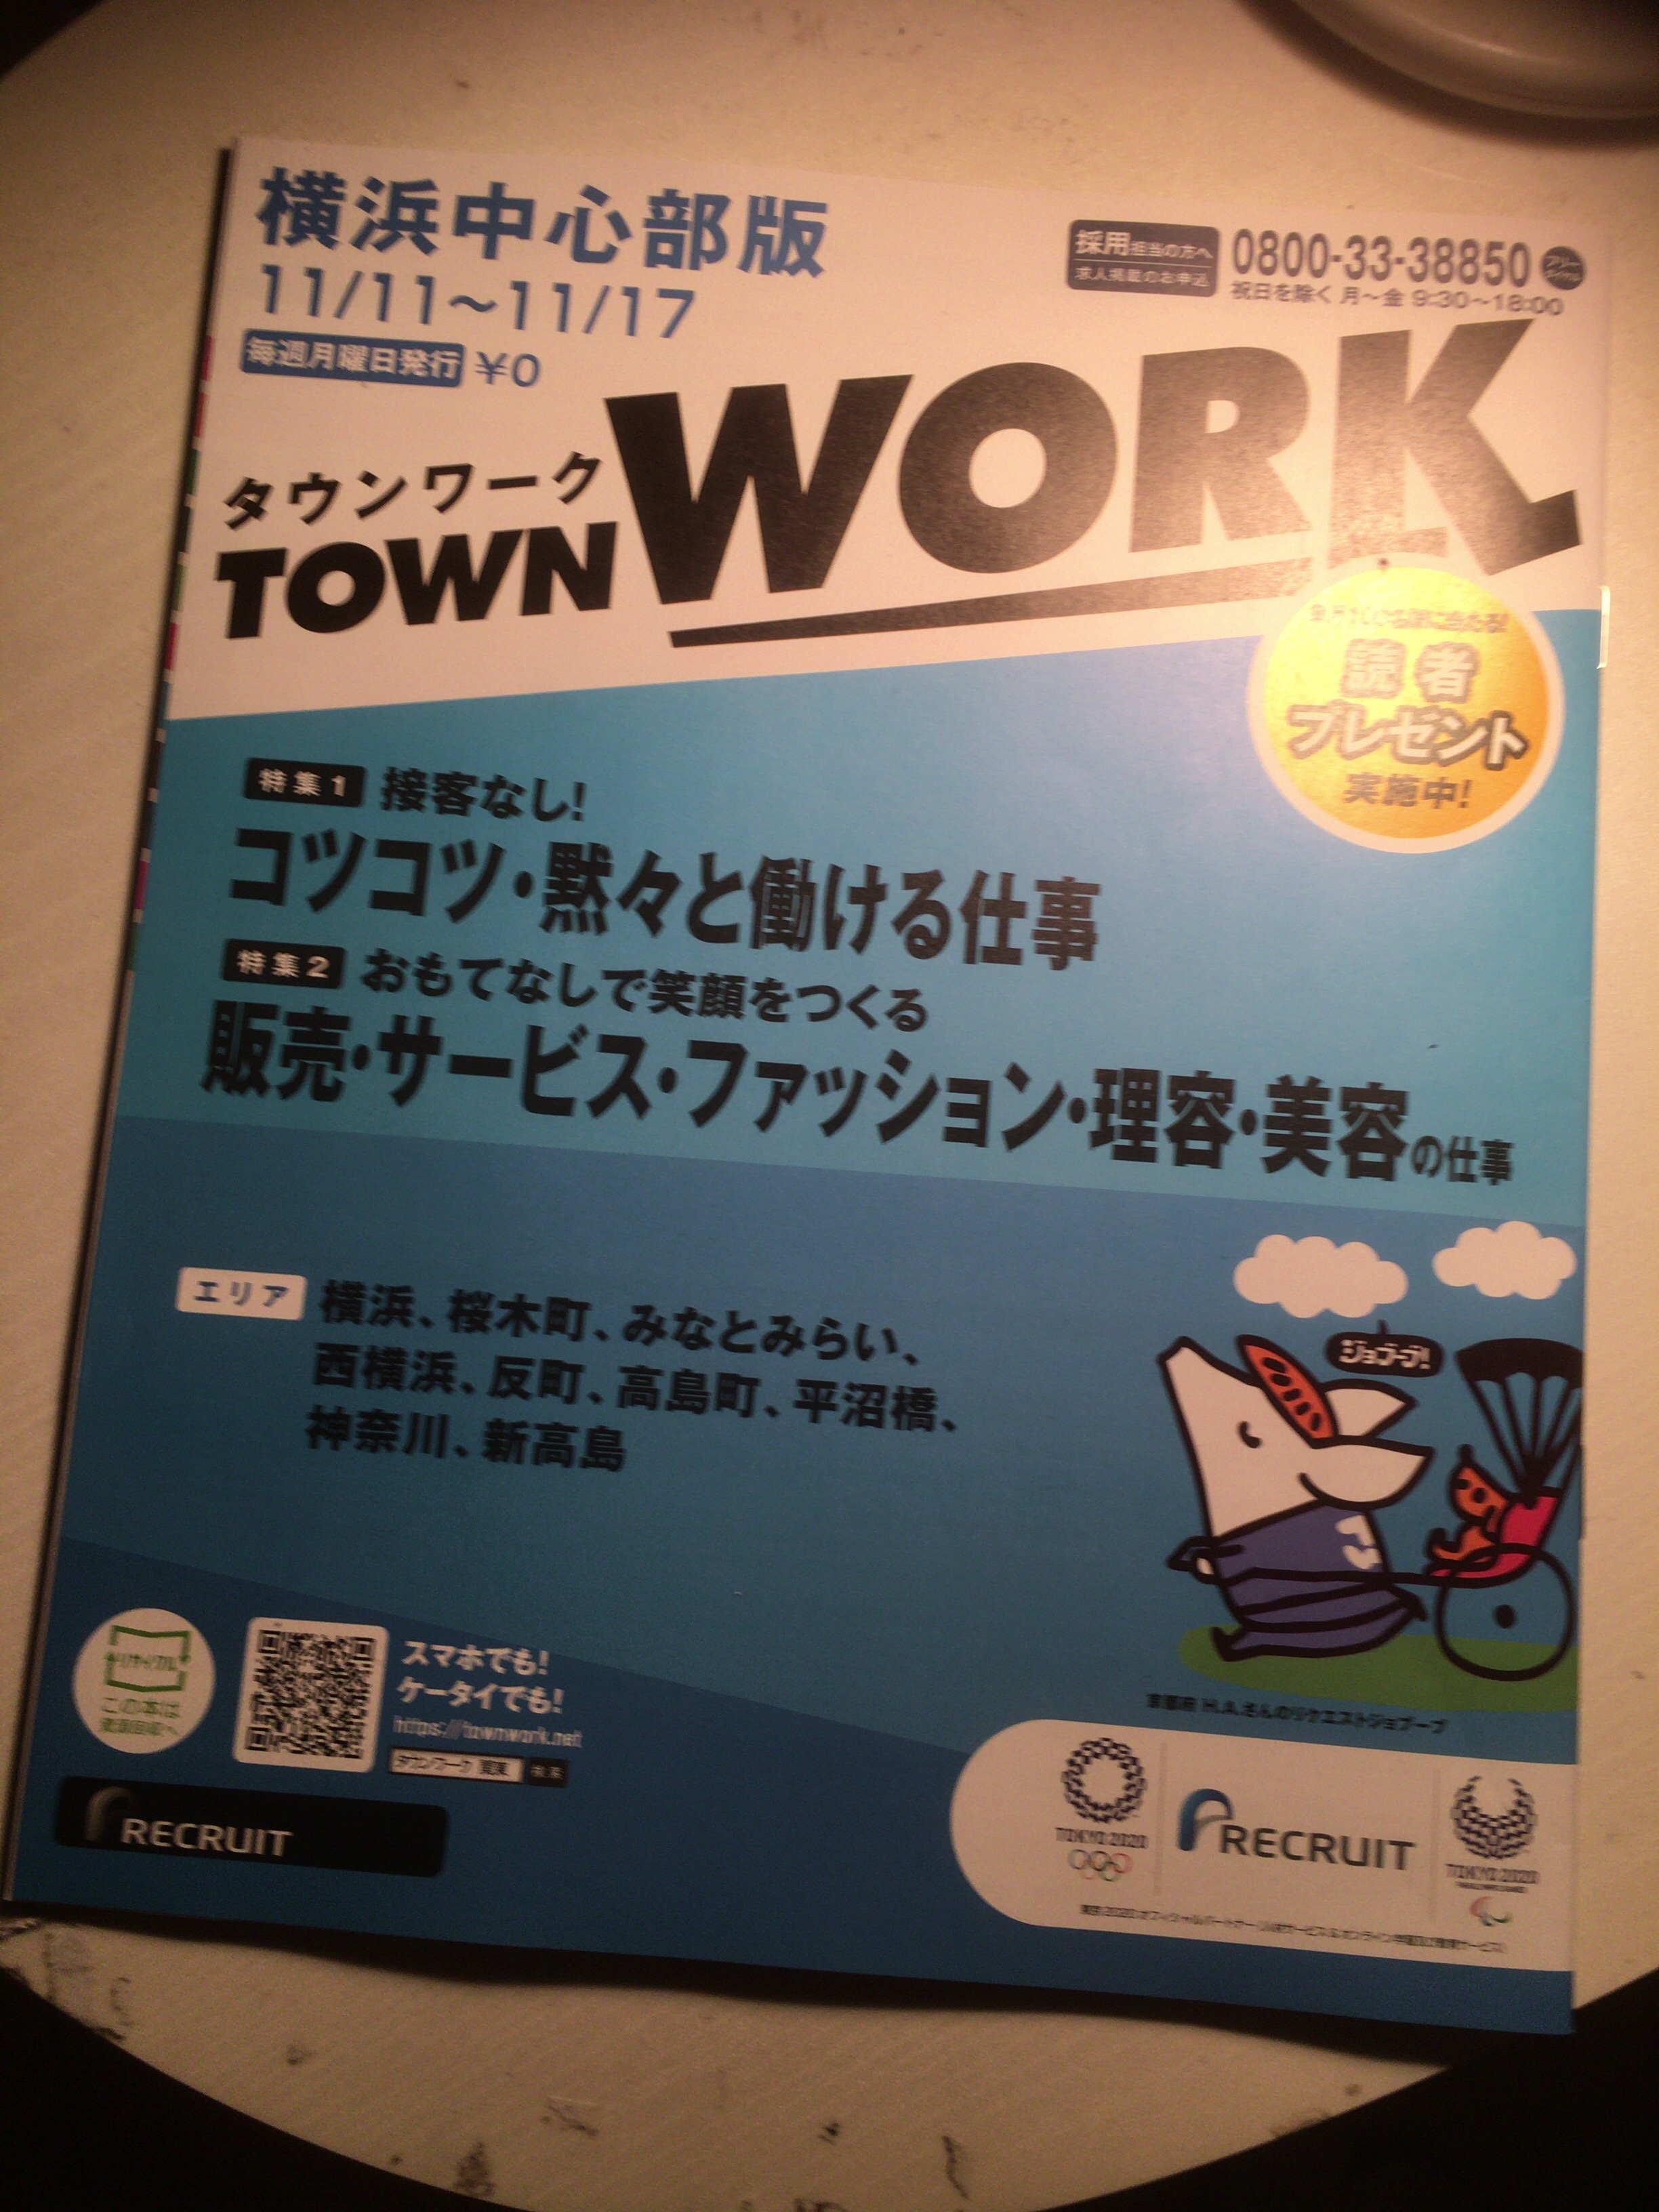 TOWN WORK 搭載